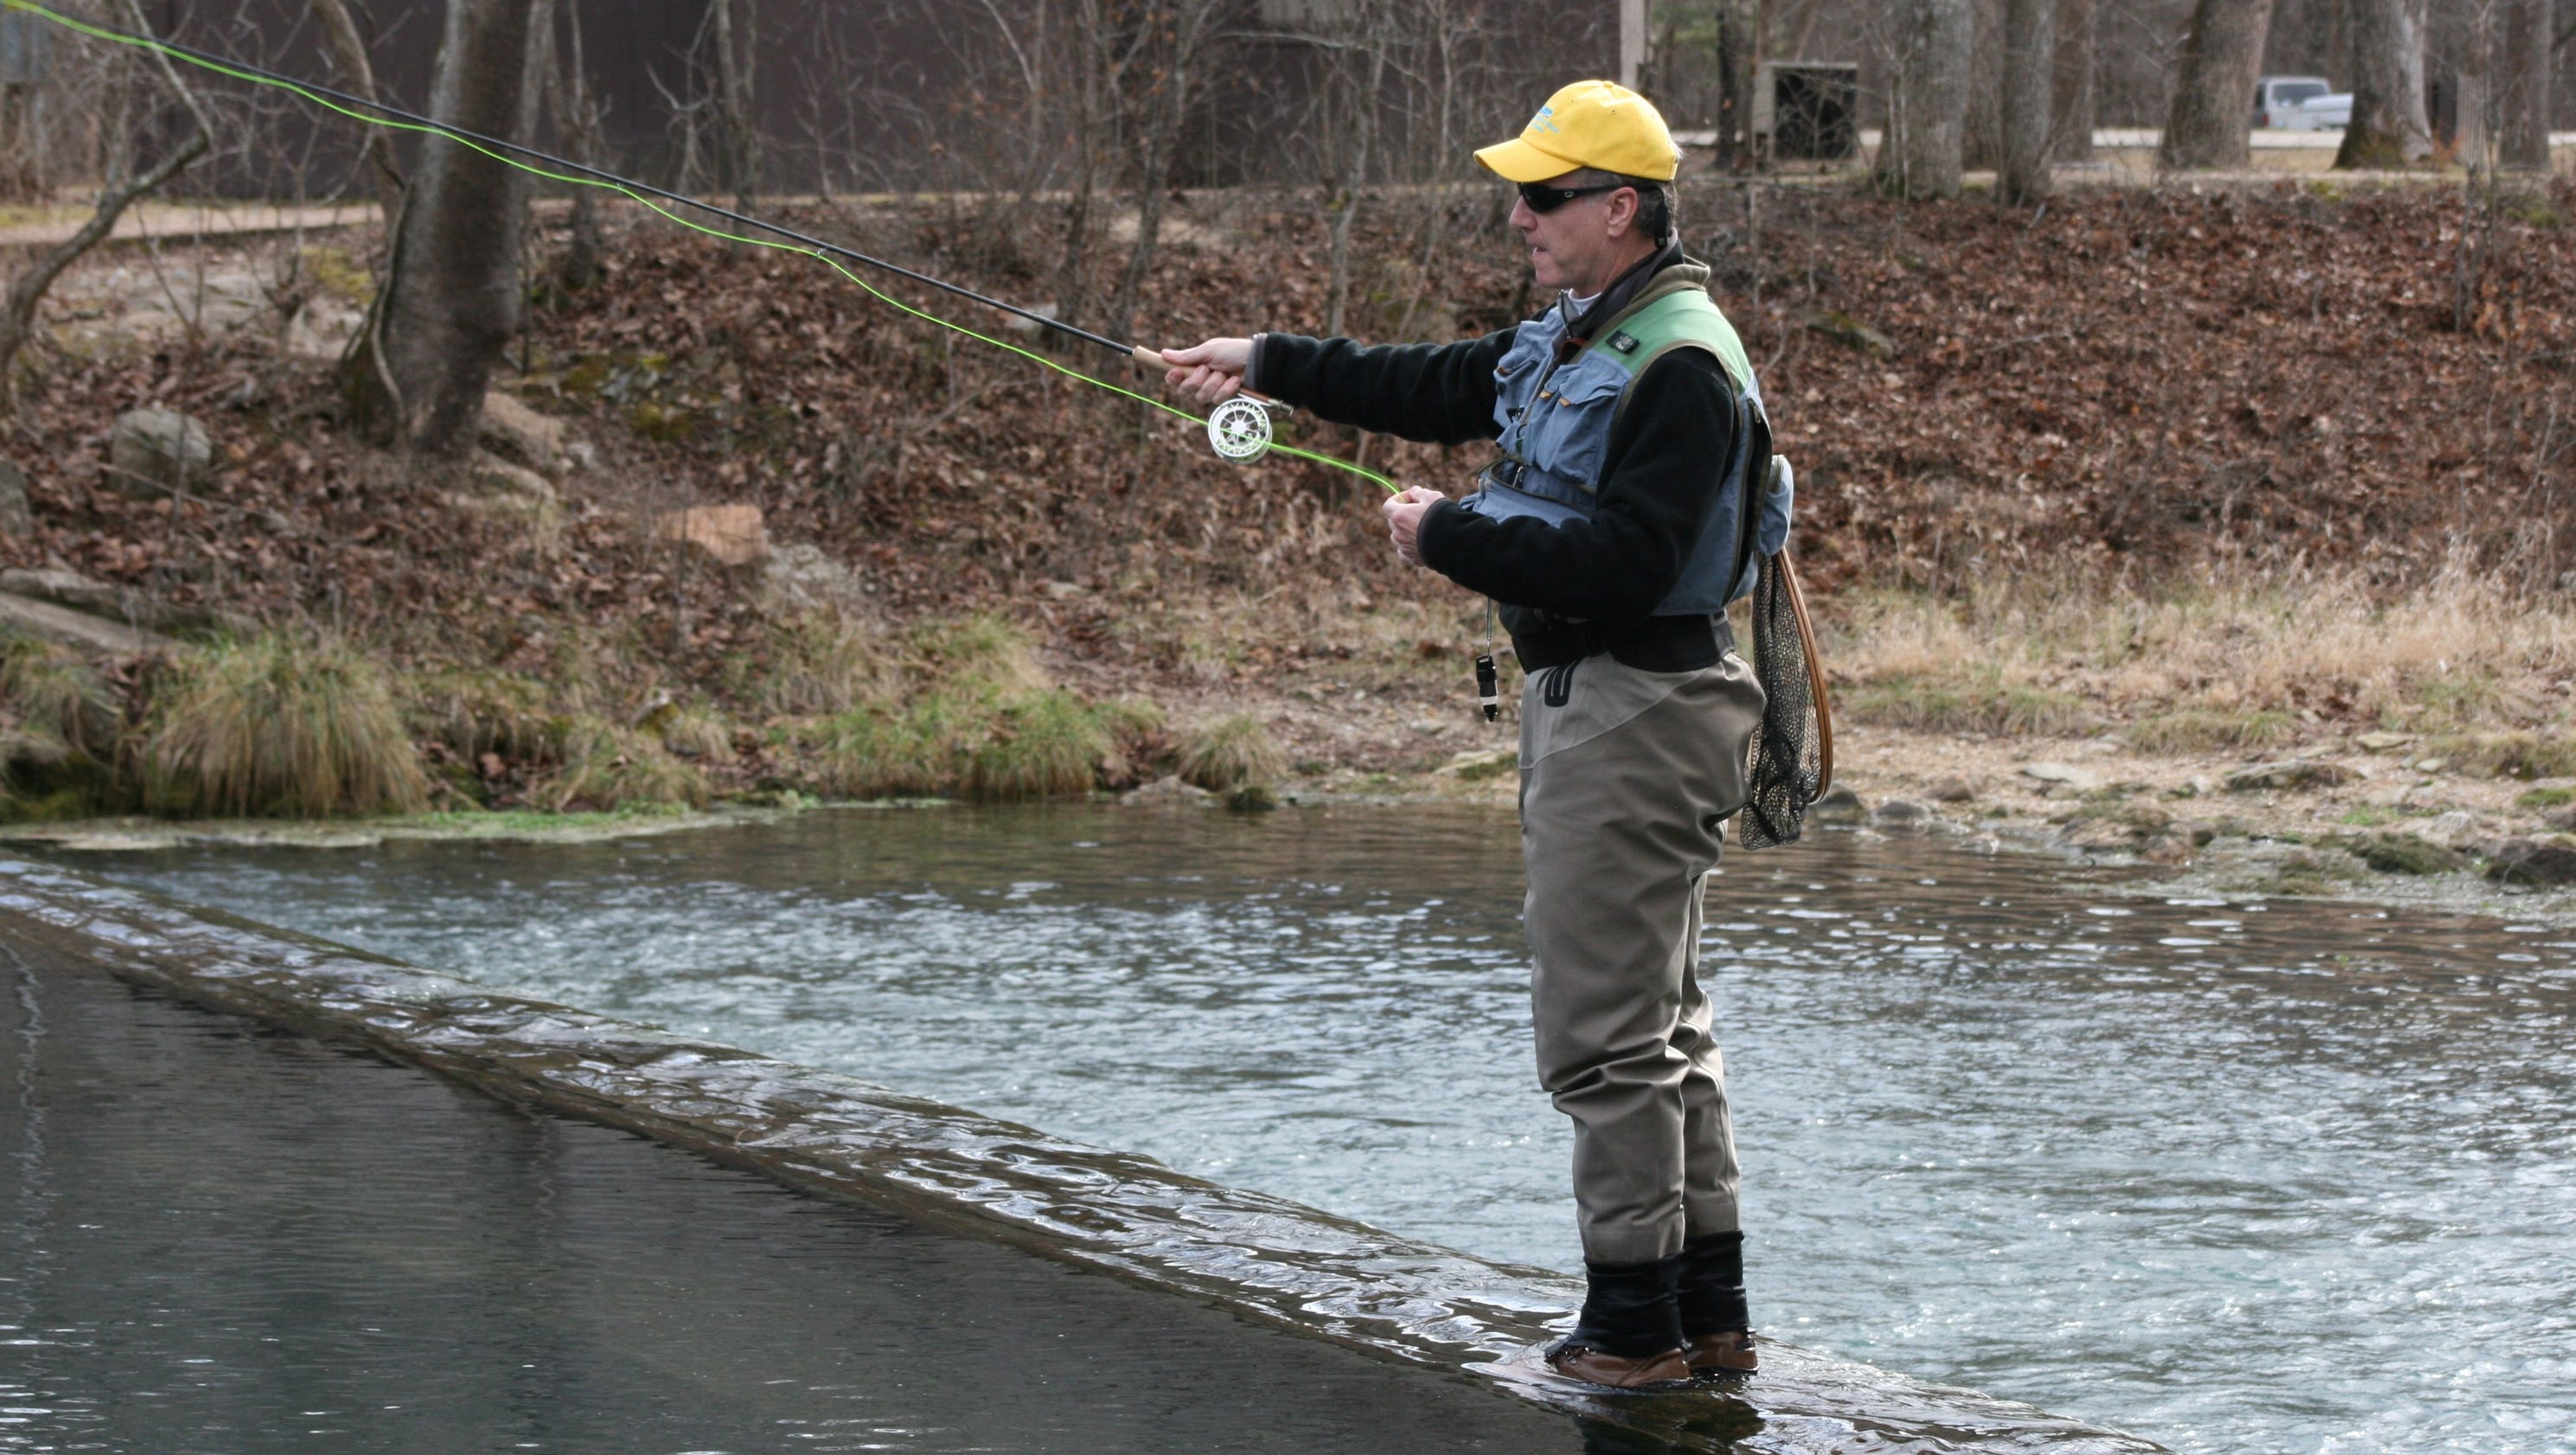 Winter fishing: Trout run year-round at this Mo. park